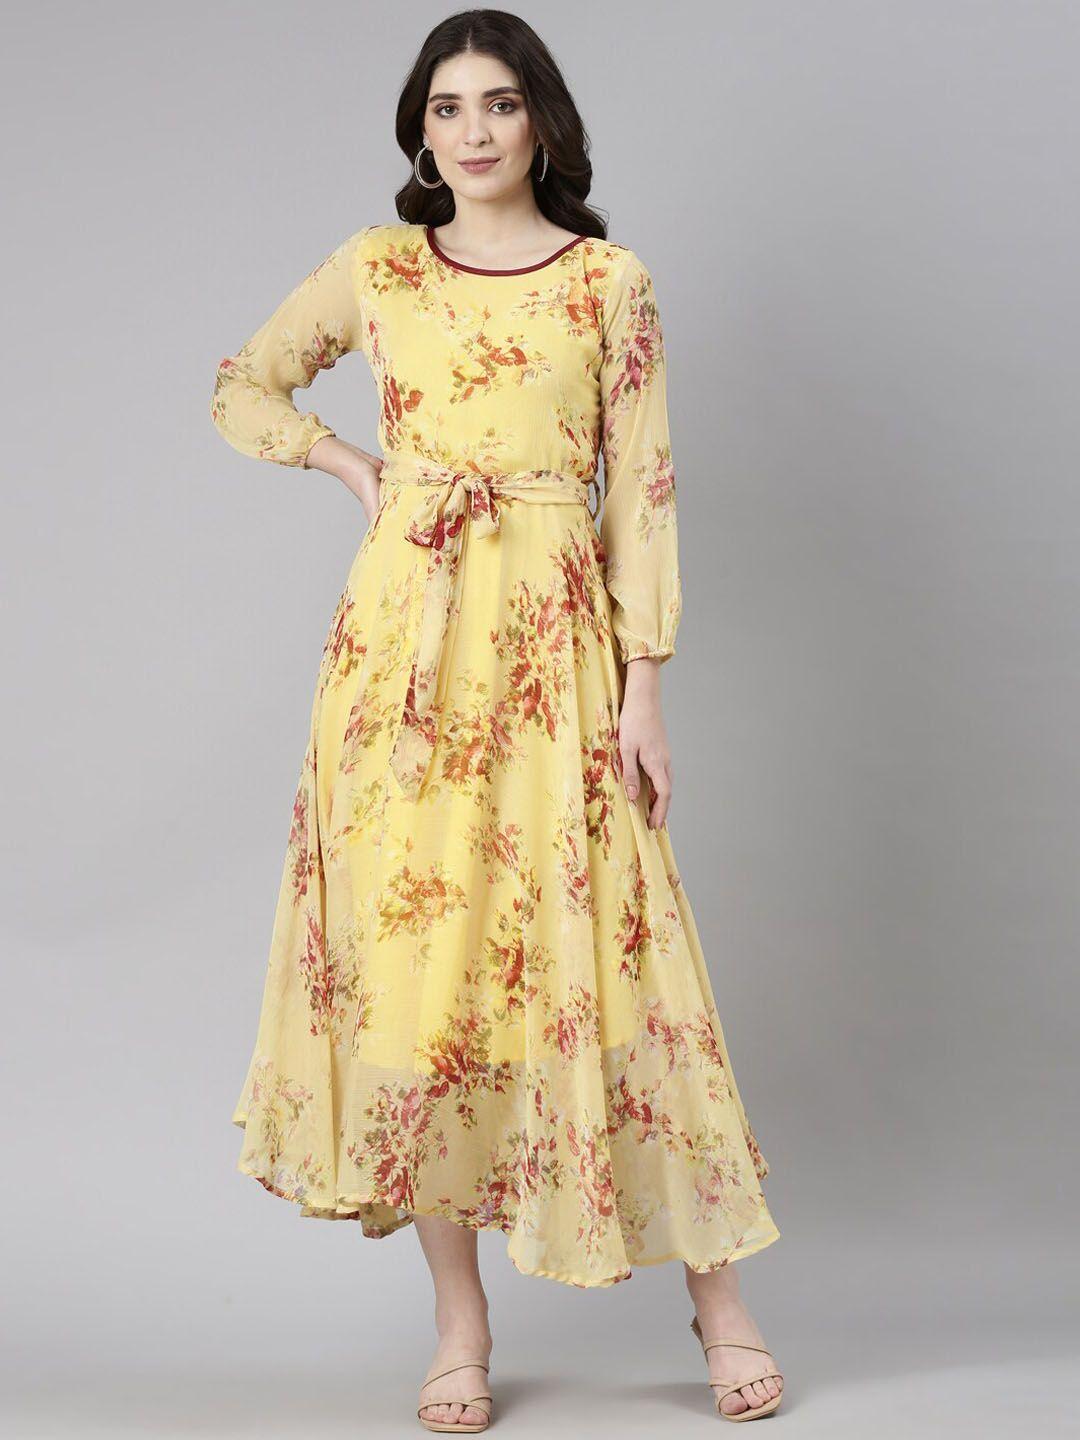 souchii floral printed cuffed sleeves chiffon fit and flare midi ethnic dress